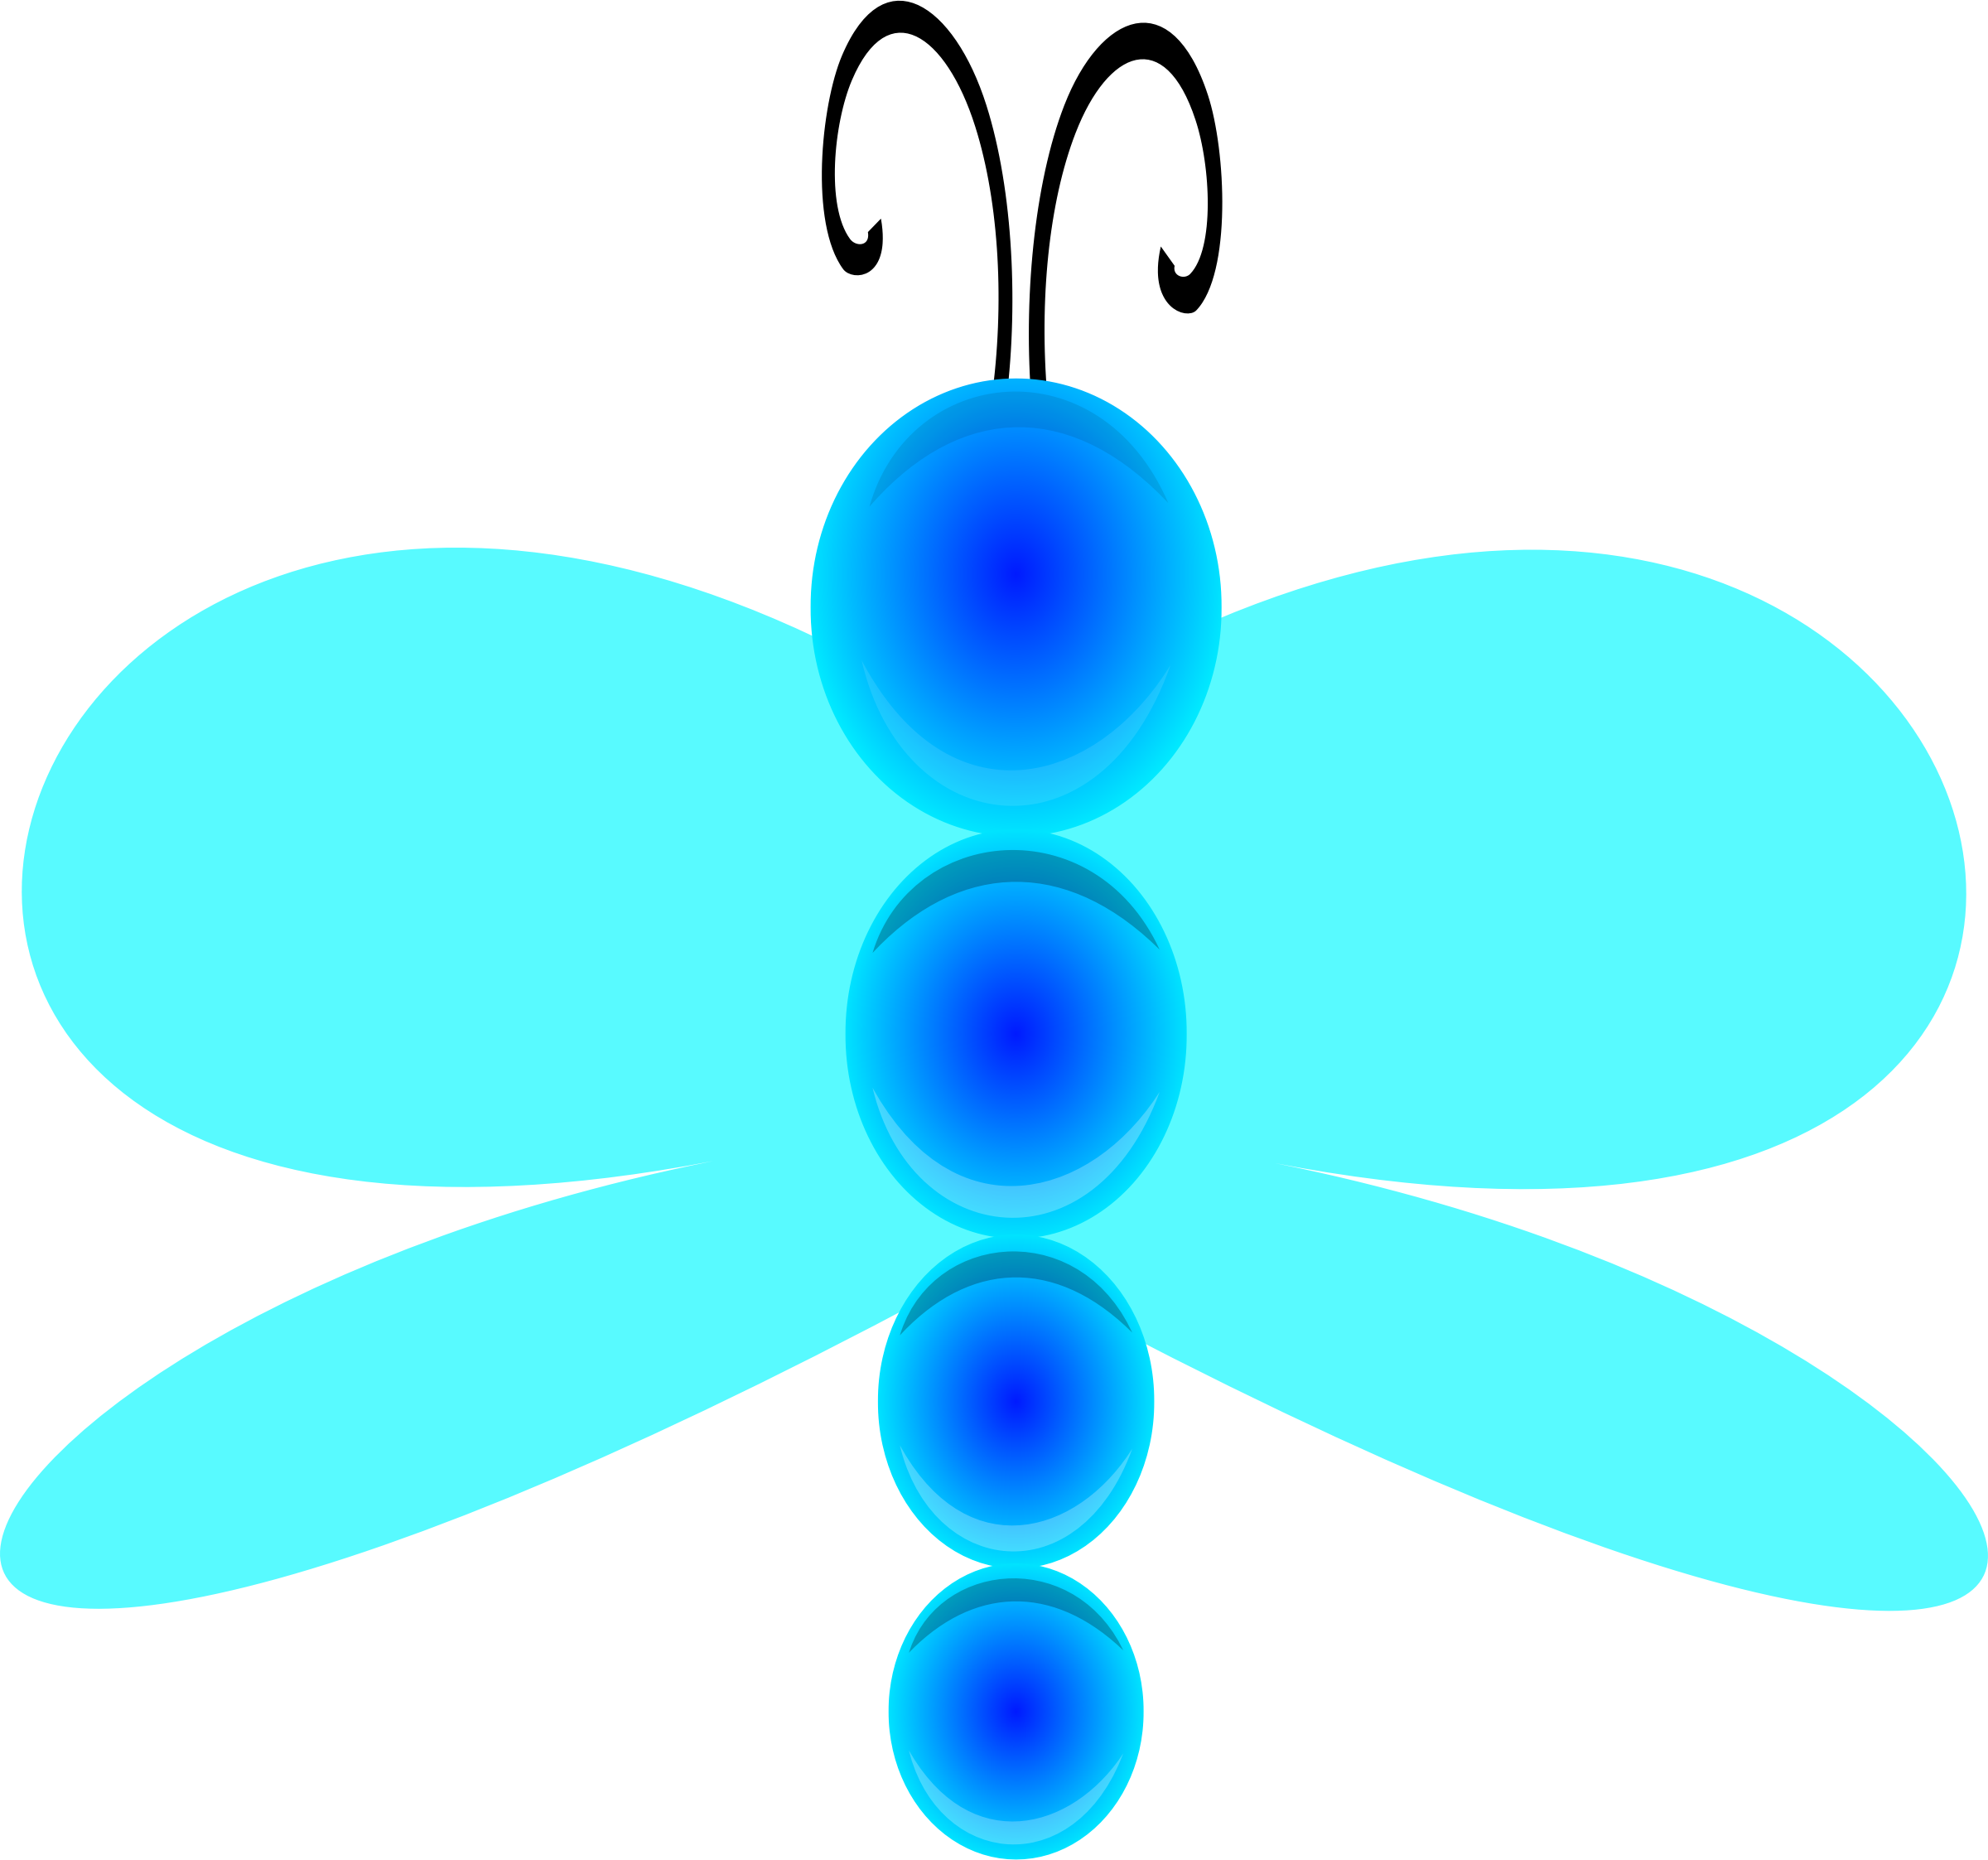 Dragon fly by jesseakc. Dragonfly clipart turquoise